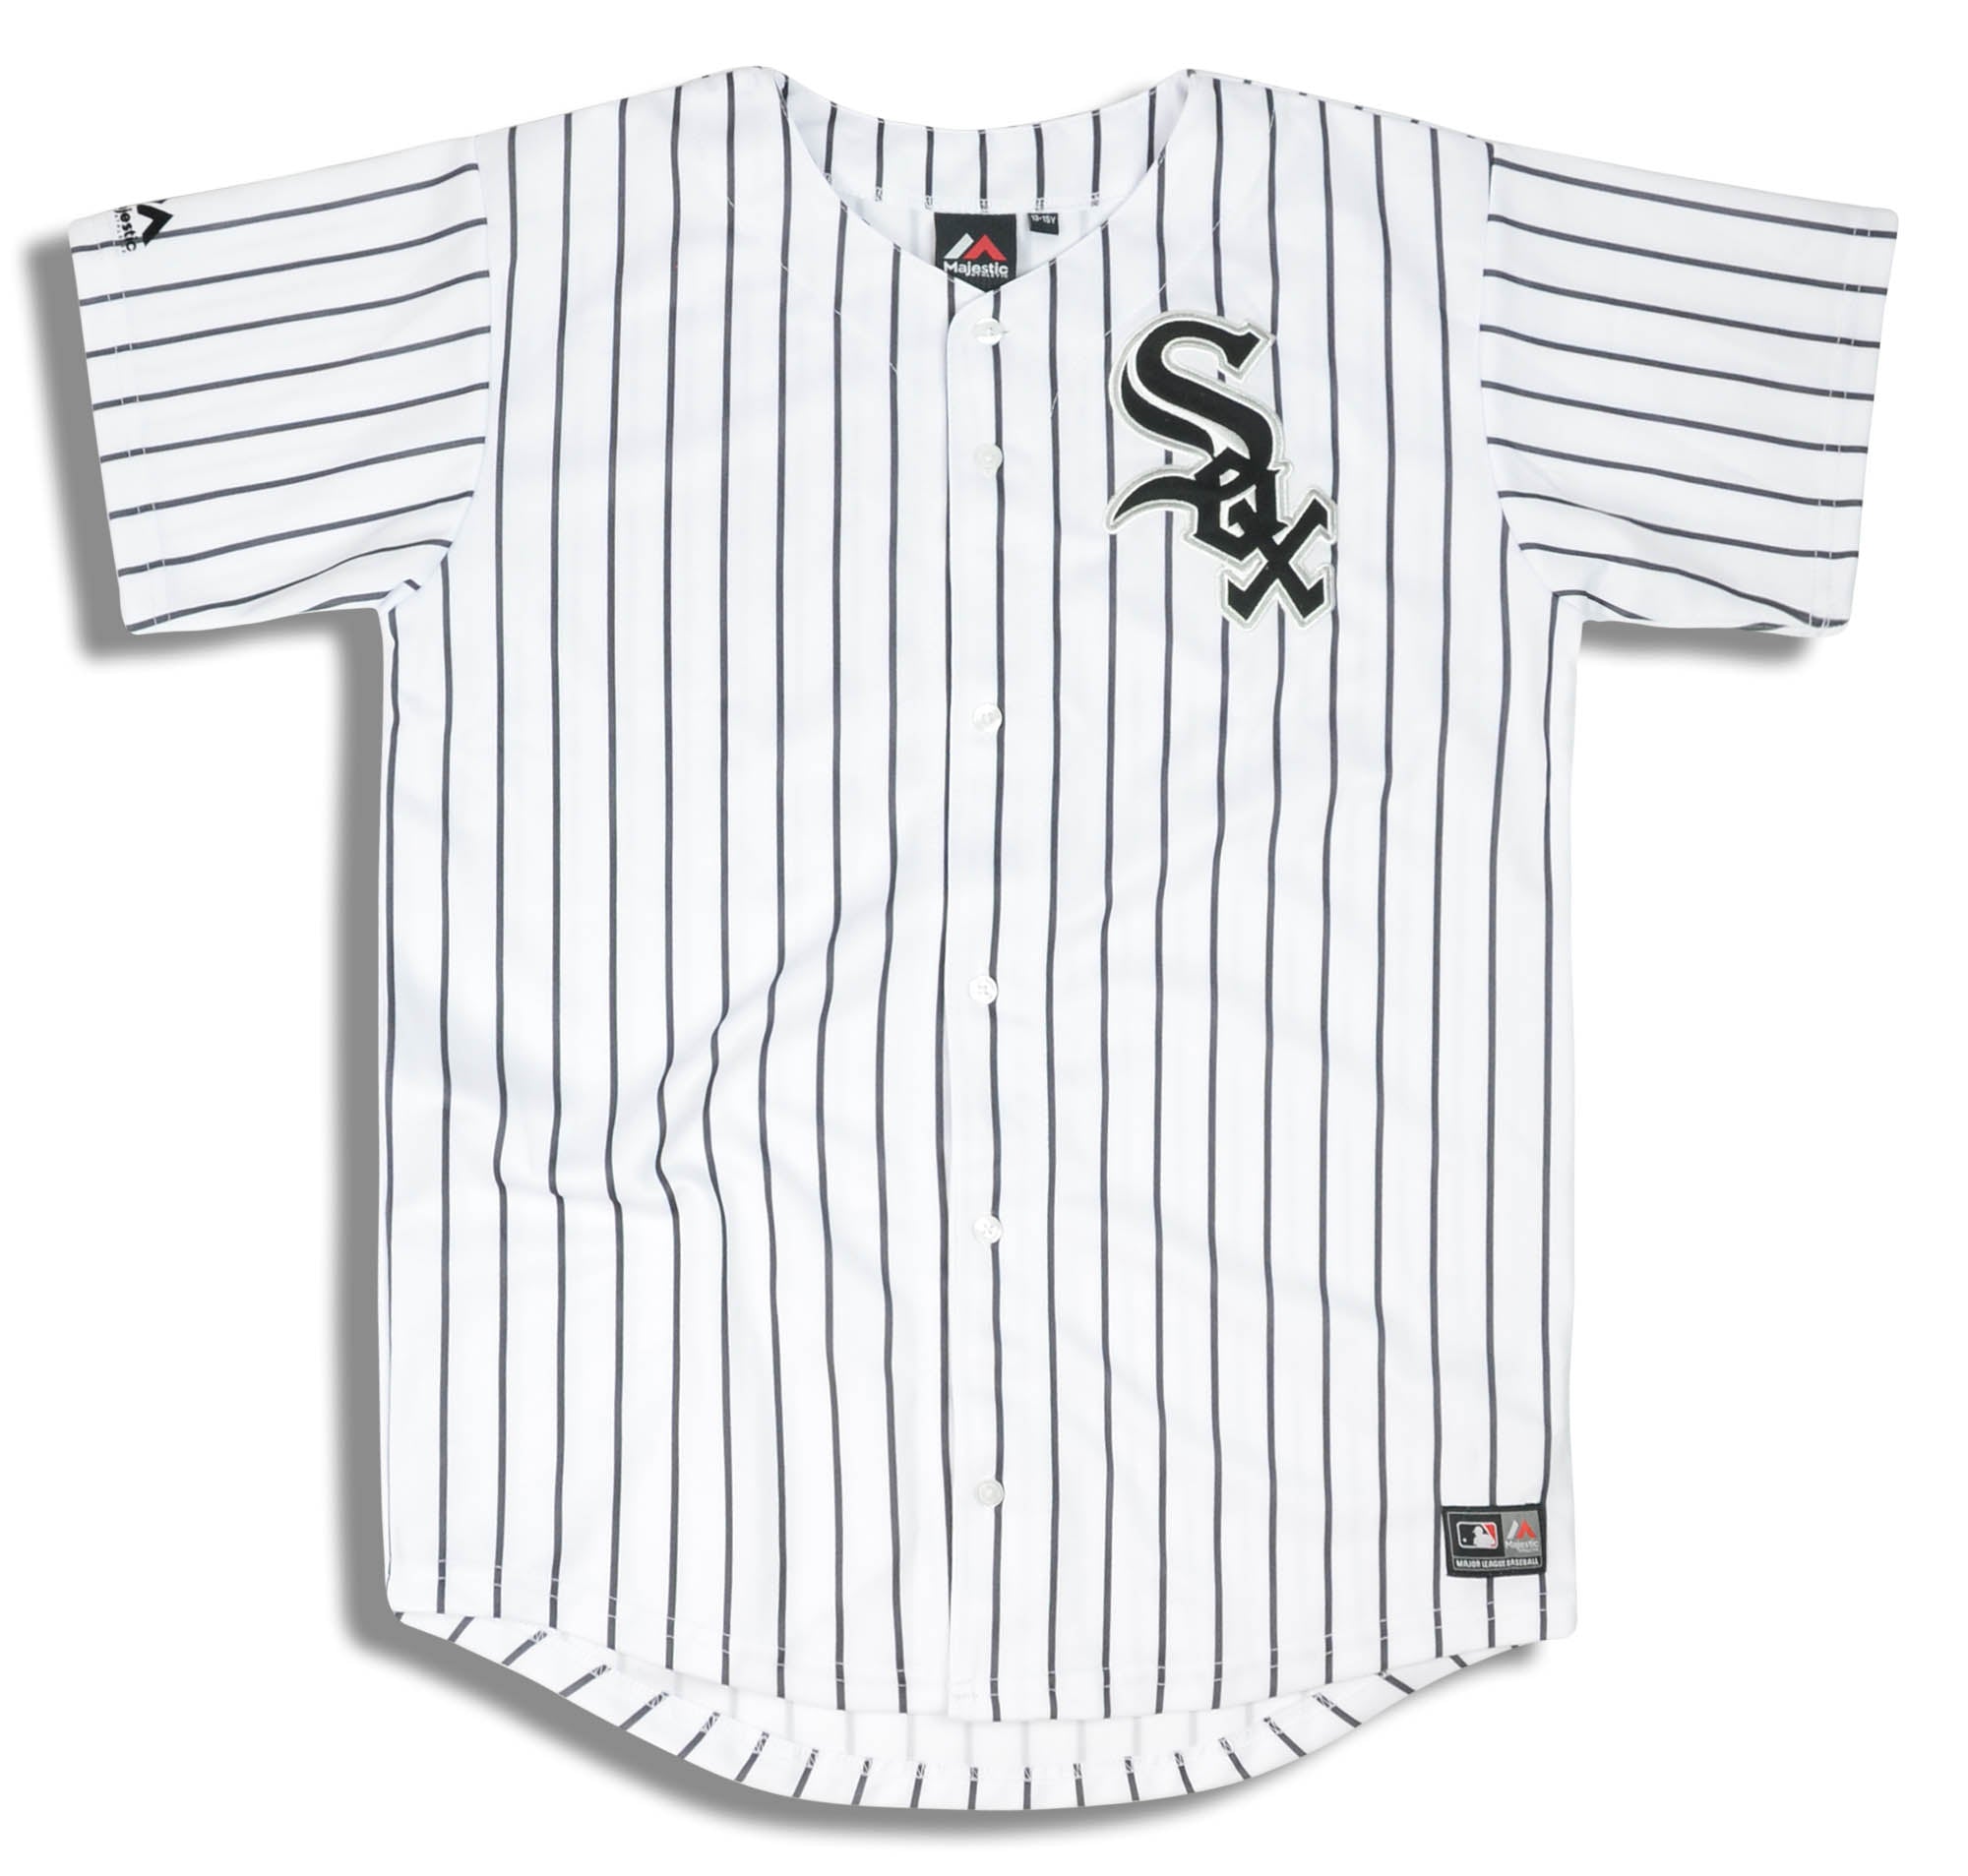 The Chicago White Sox MLB soccer jersey